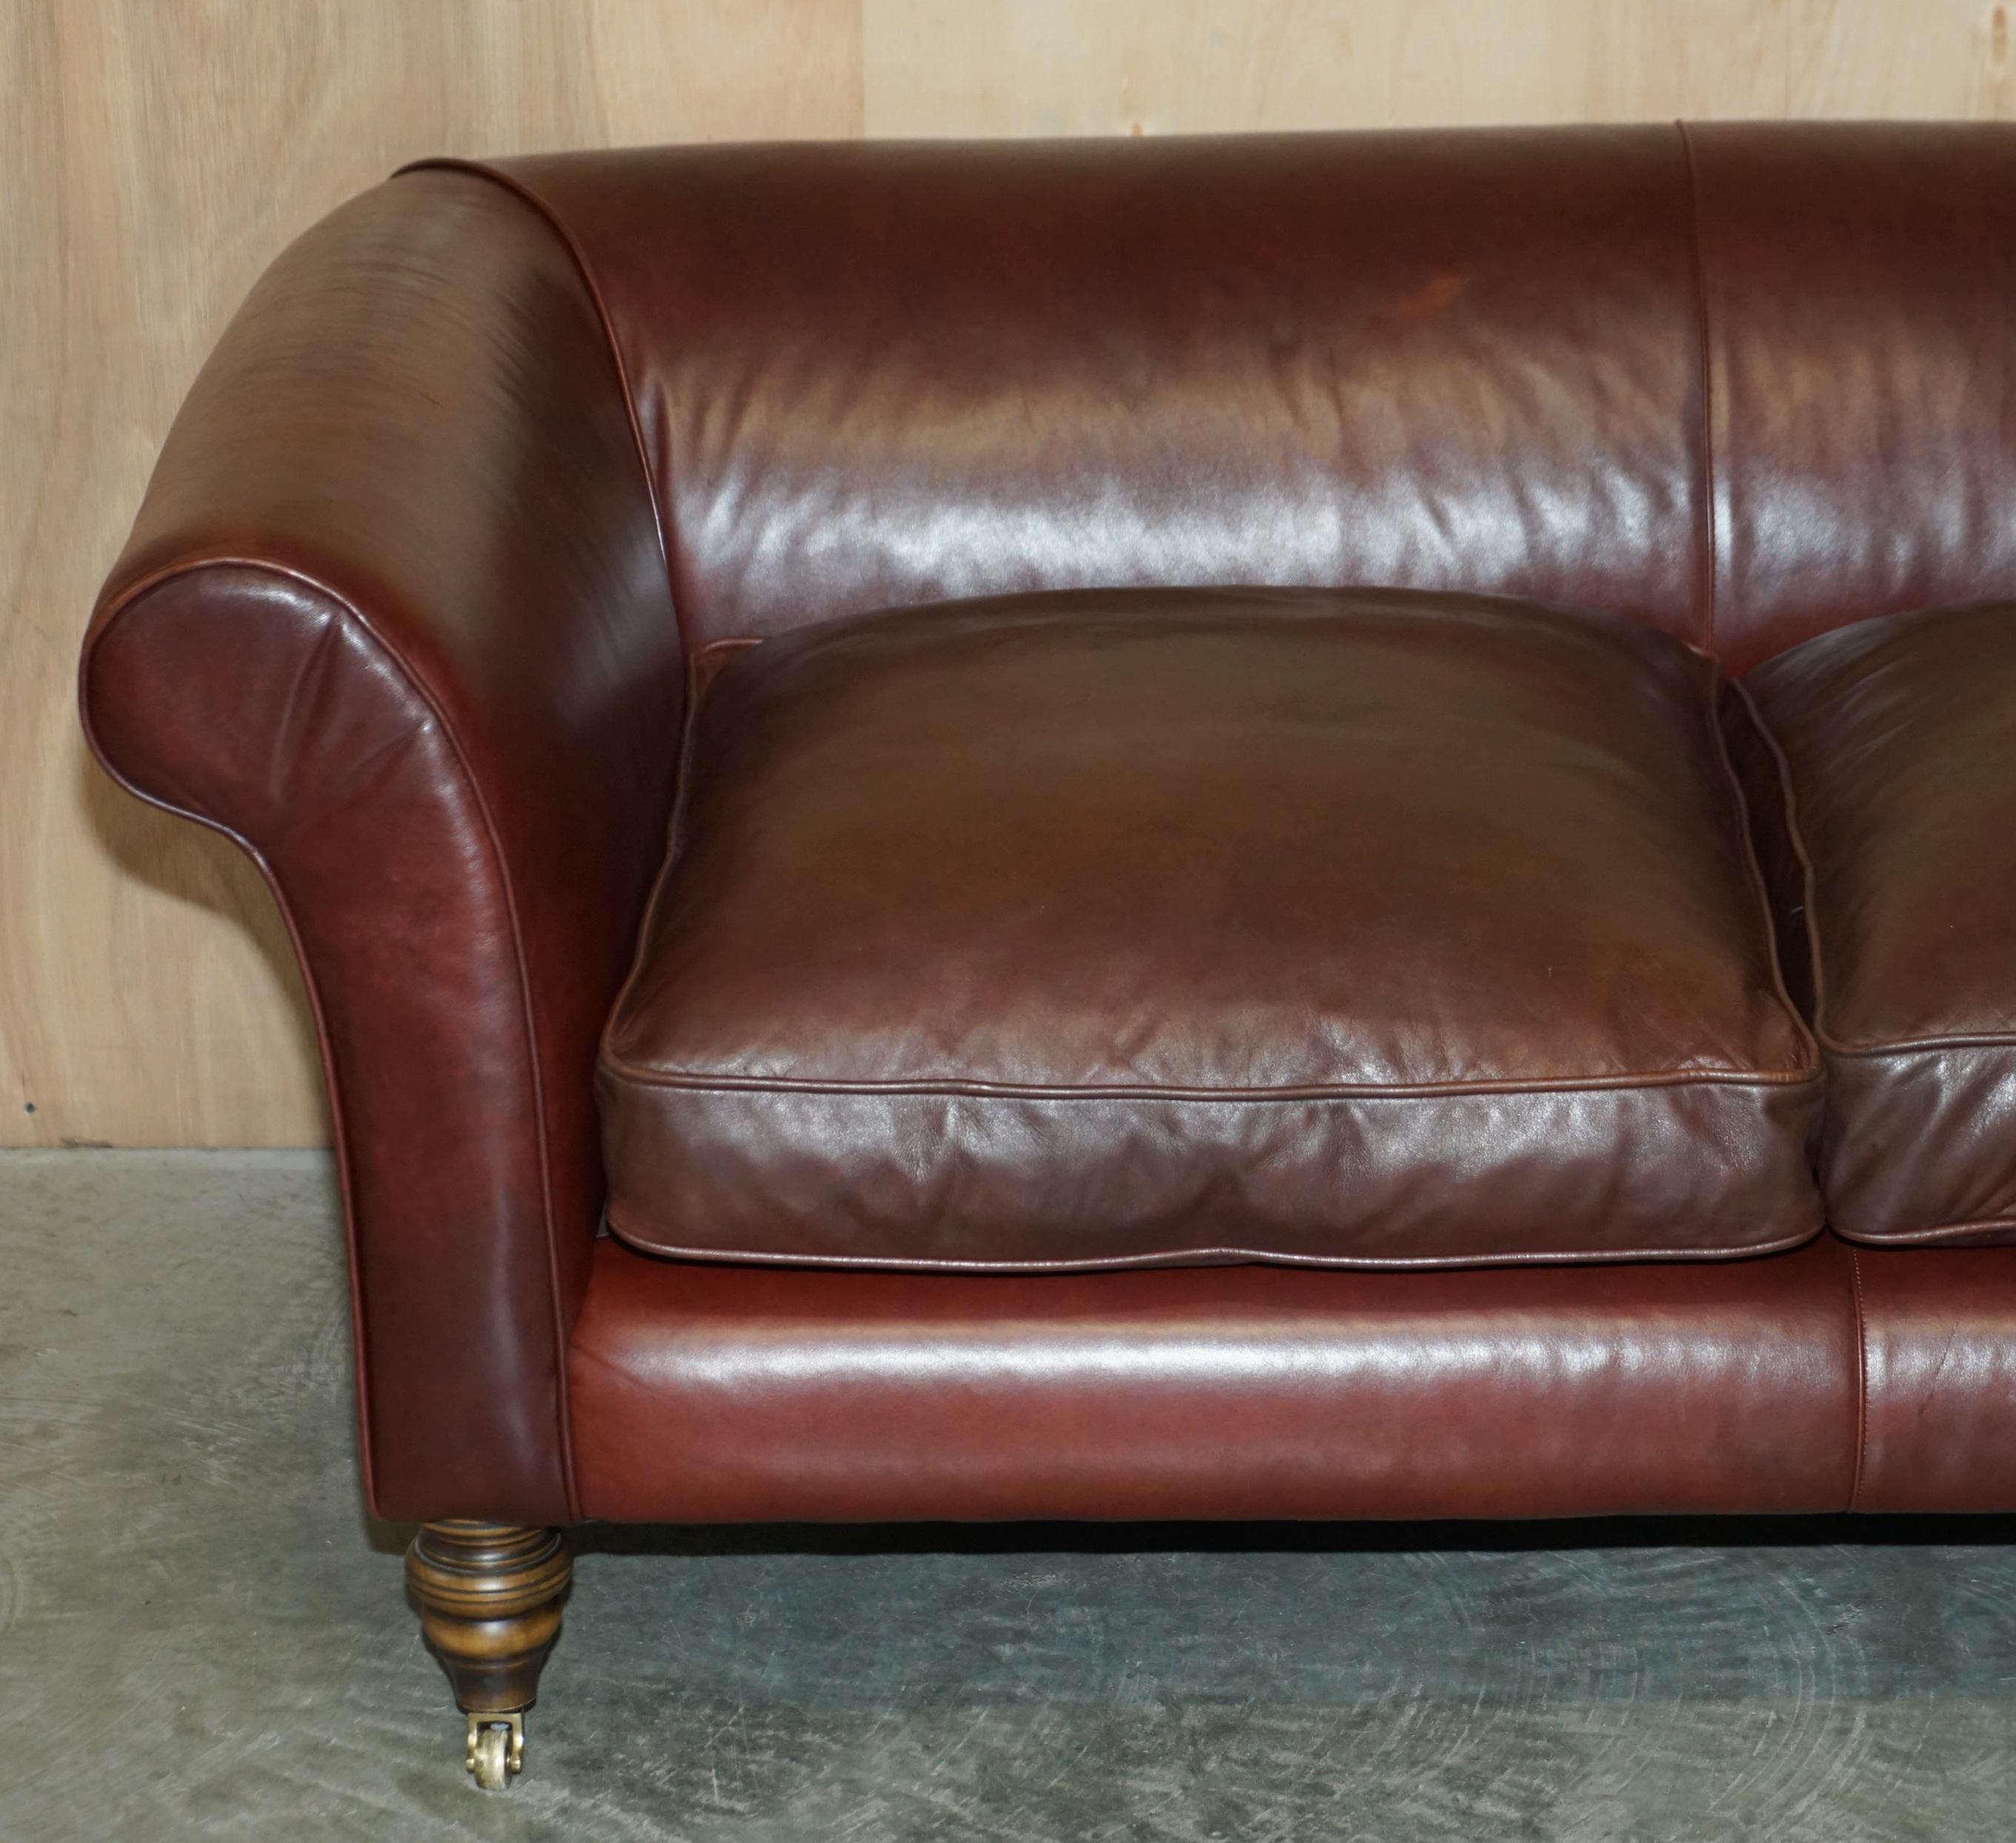 ViNTAGE HANDDYED BROWN LEATHER ART DECO THREE SEAT SOFA FEATHER FILLED SEATHER (Art déco) im Angebot